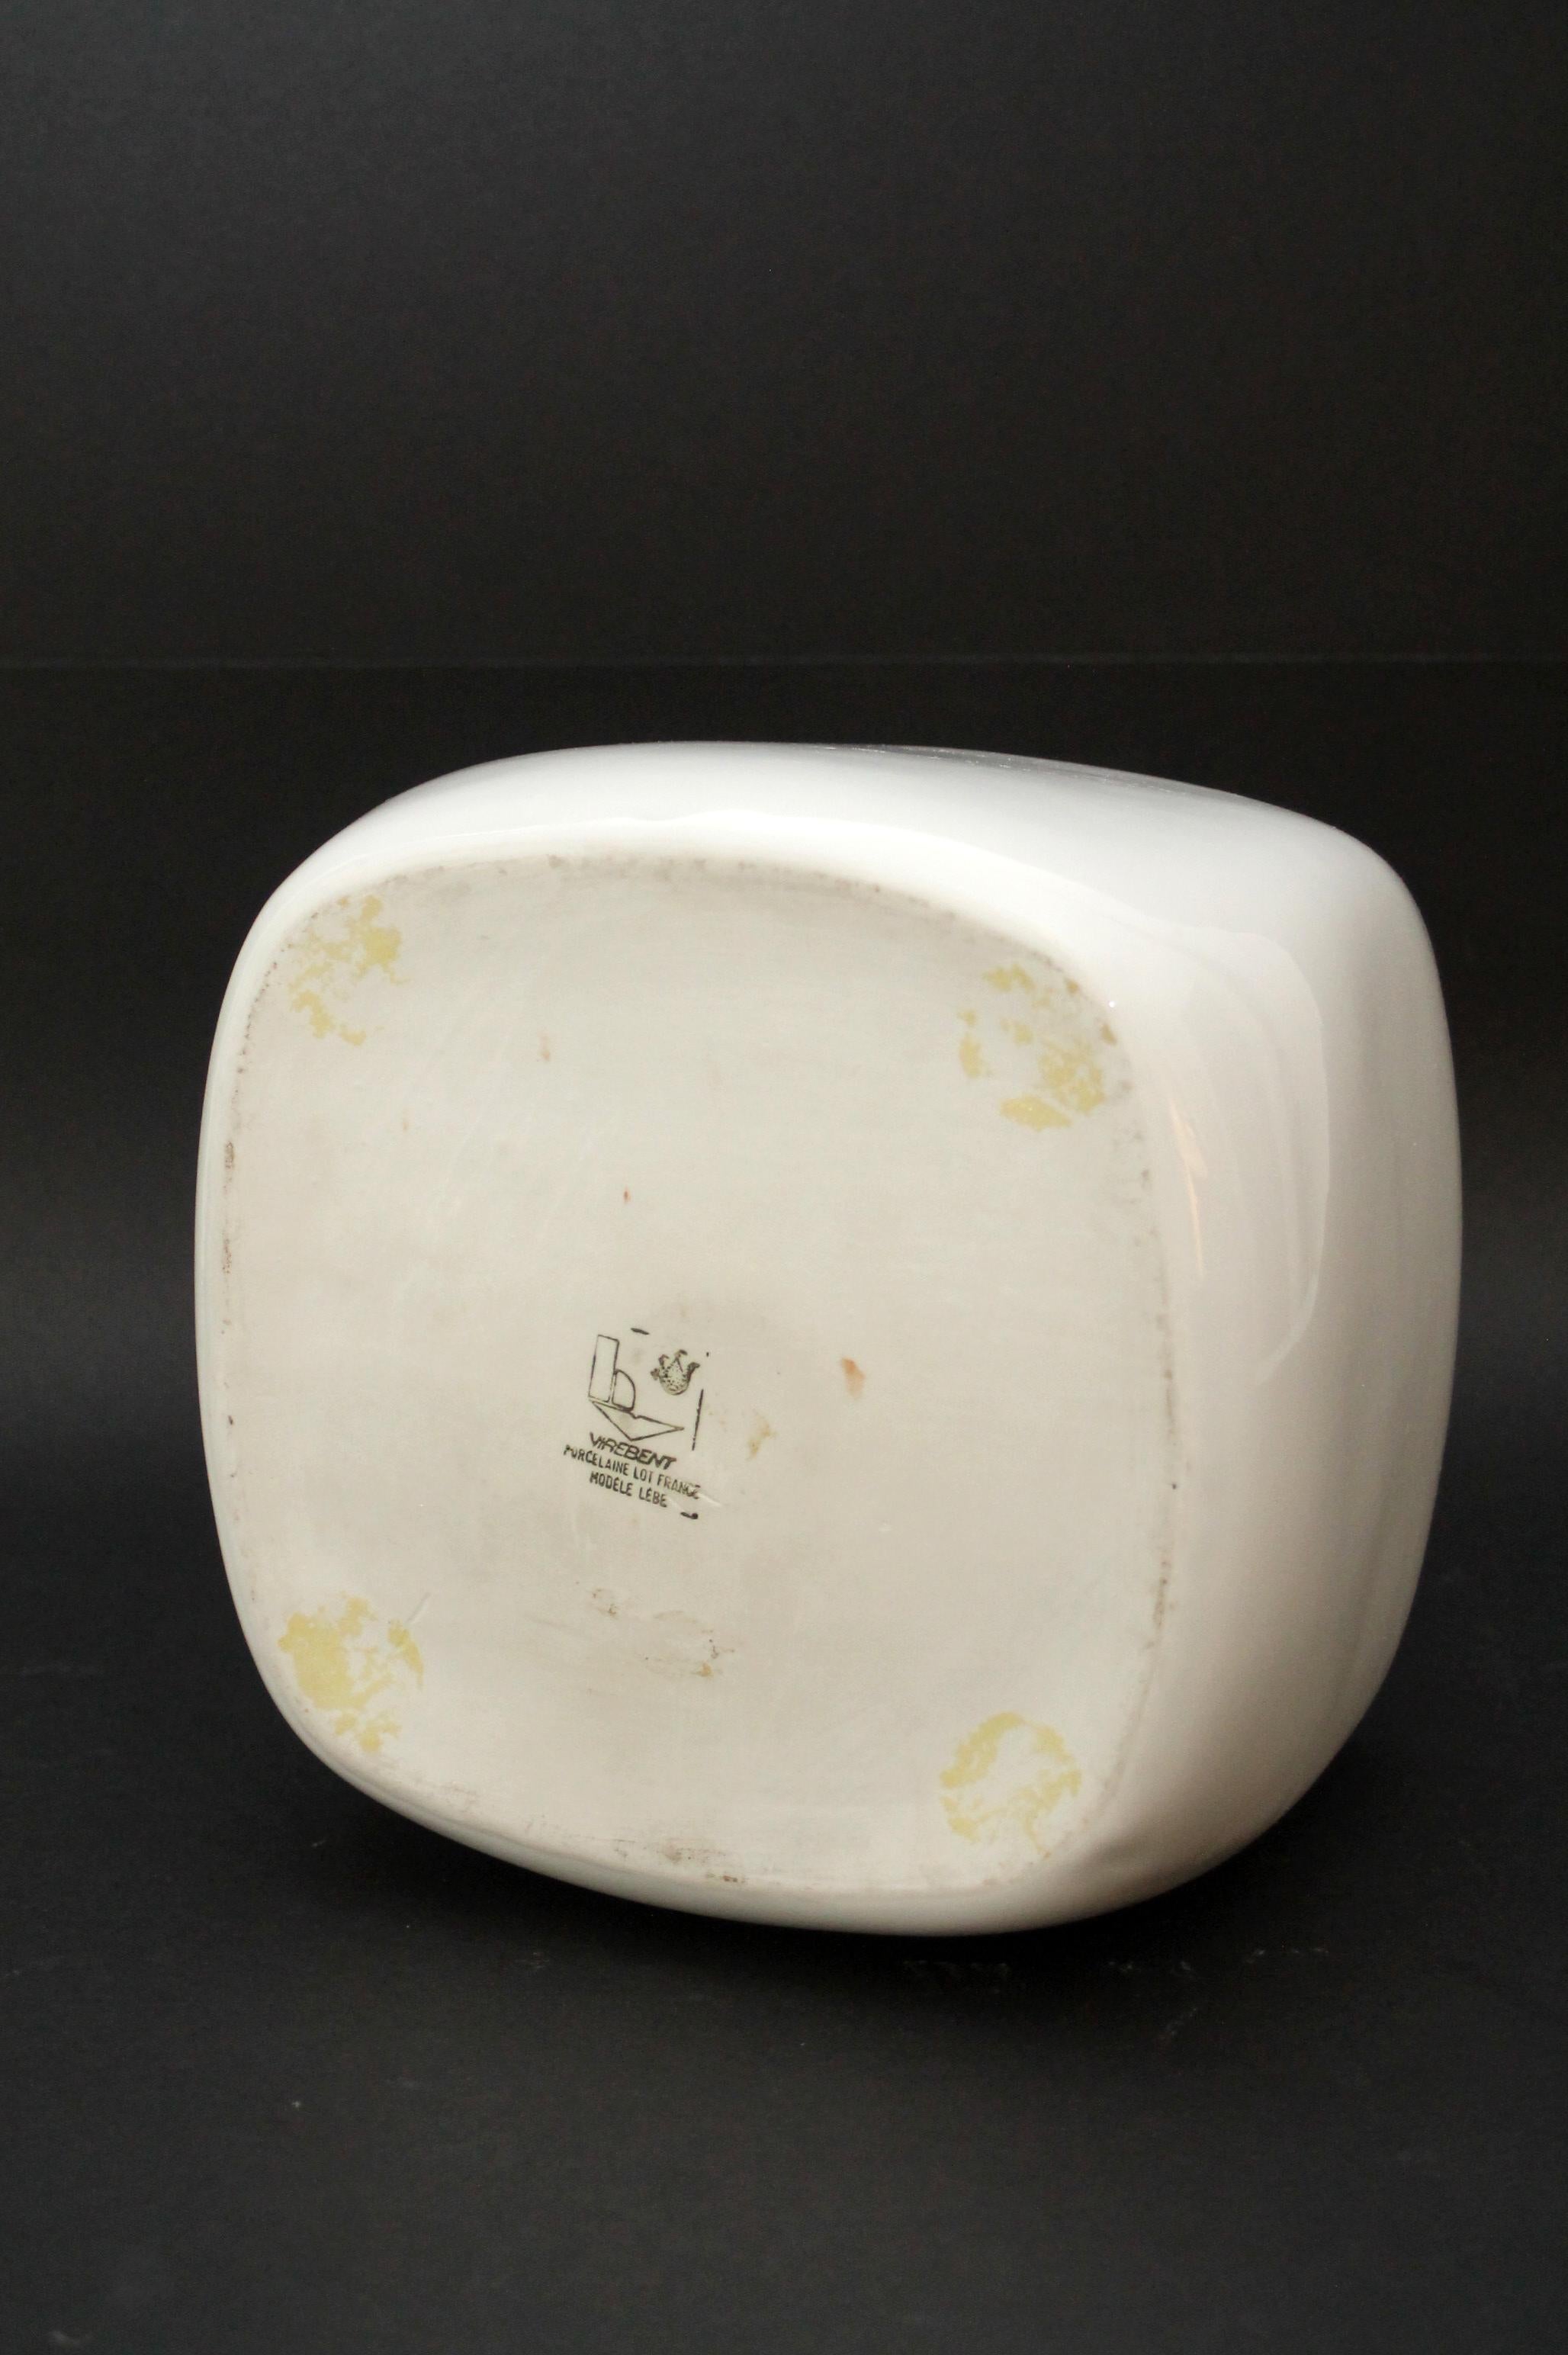 Hand-Crafted Virebent Mid-century modern white ceramic vase by Pierre Lebe (19x19x15cm) MINT For Sale